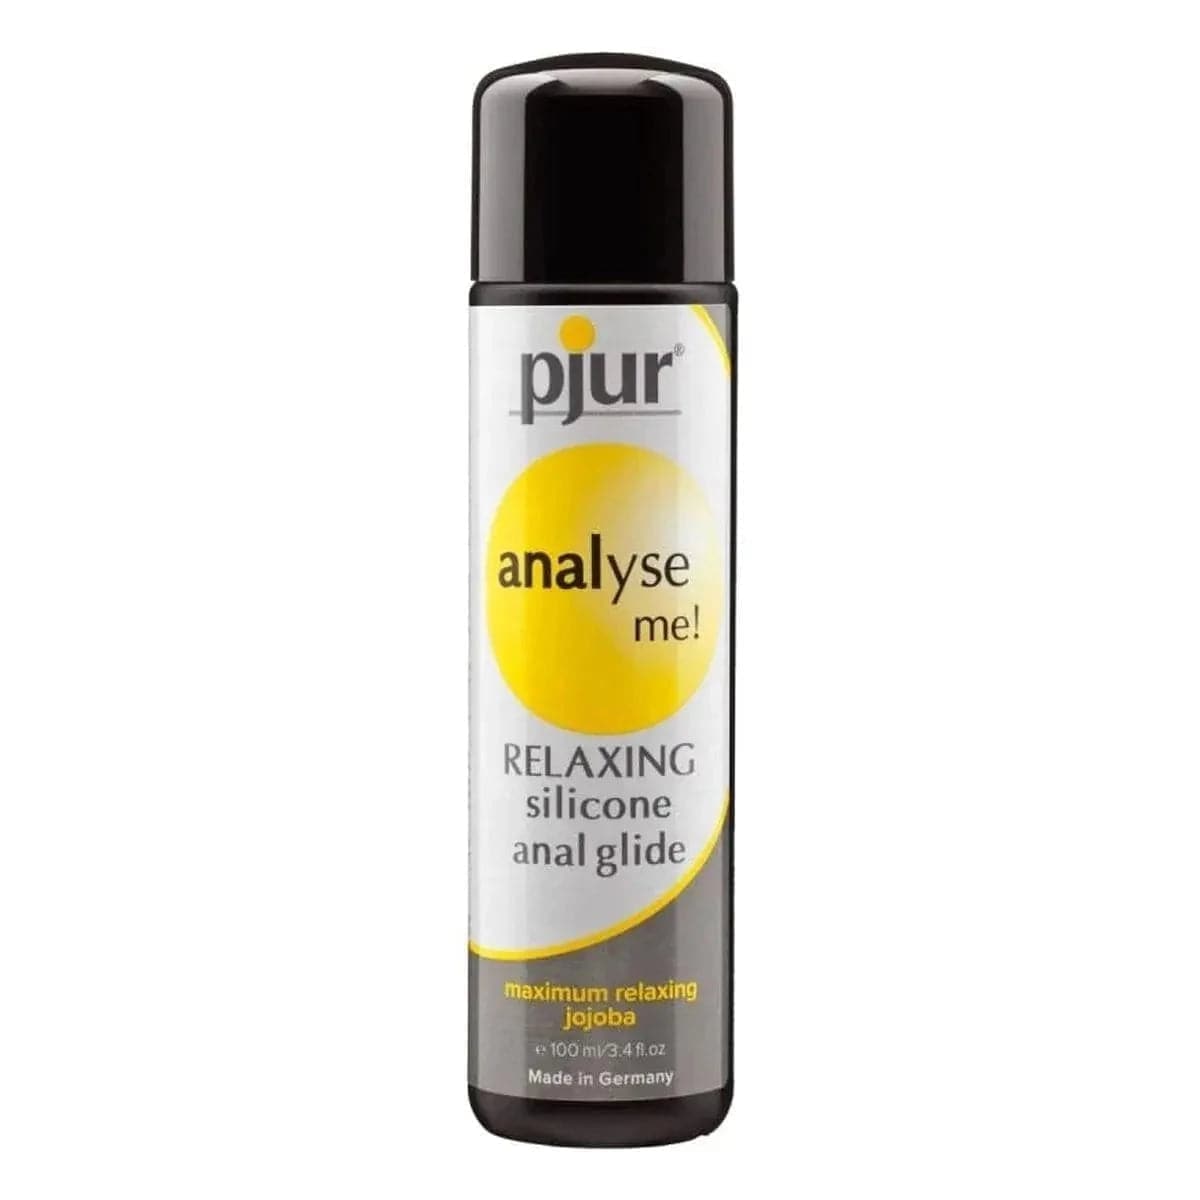 Lubrificante Silicone Relaxing Pjur Analyse me!